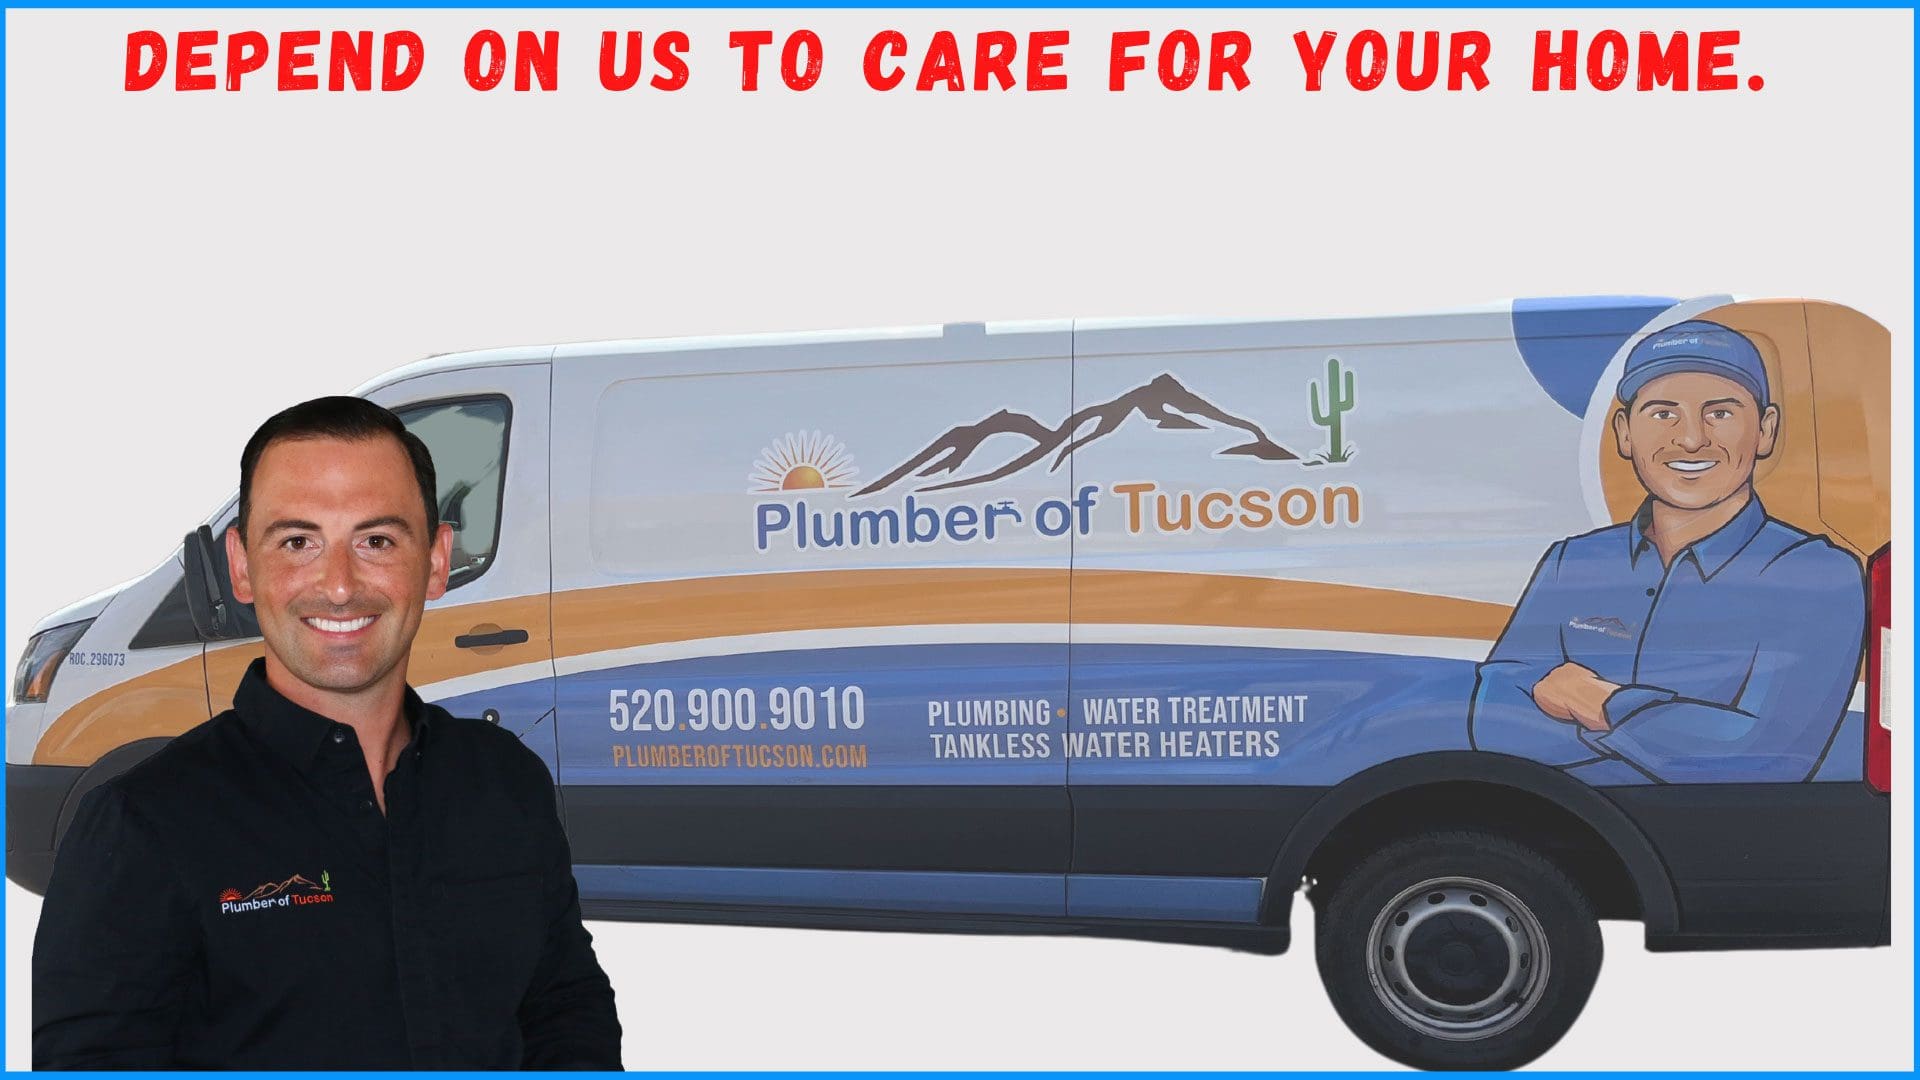 You can depend on Plumber of Tucson